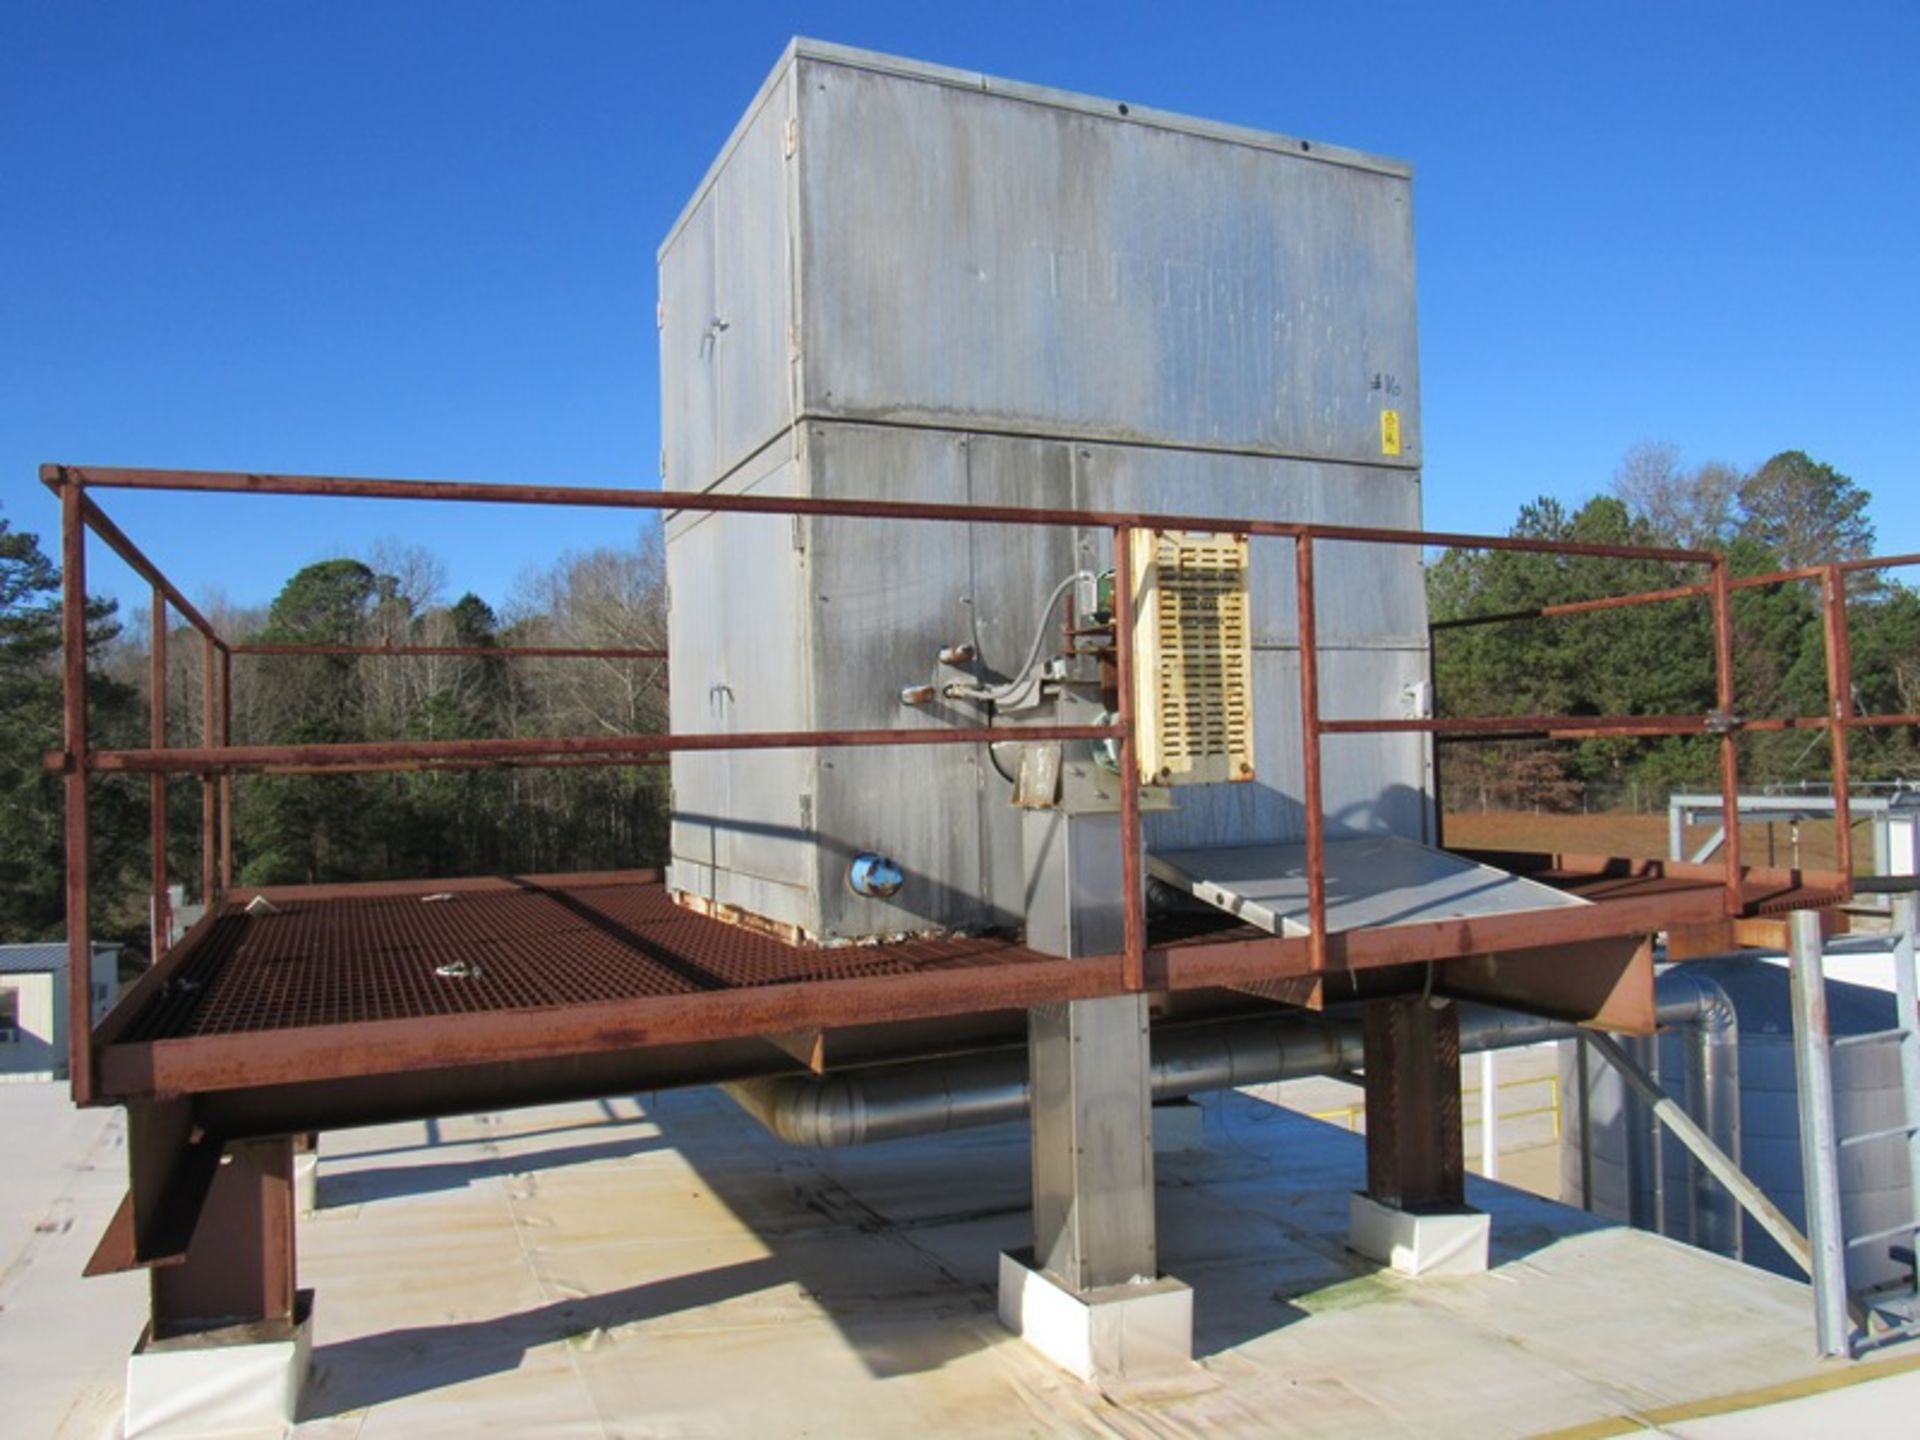 Turbo Mdl. Tigar 36-20 Ammonia Plate Chiller, Ser. #E022030, on roof top structure, 21 plates in